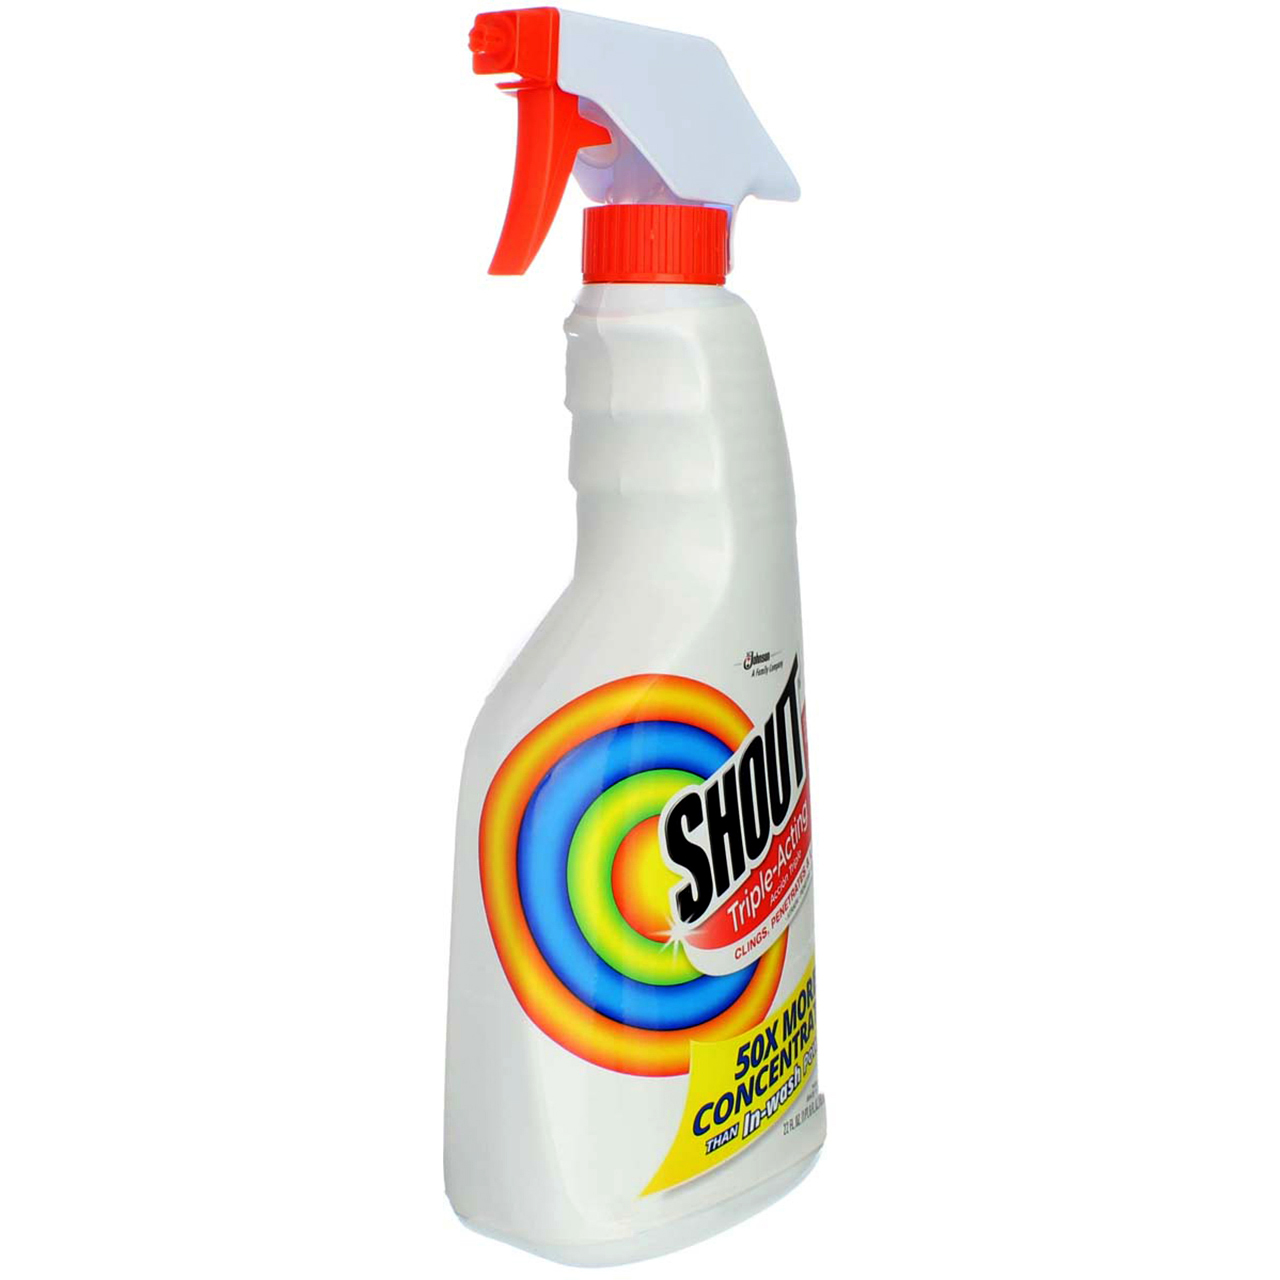 Shout Laundry Stain Remover Trigger Spray, 22 Fluid Ounce - image 2 of 4